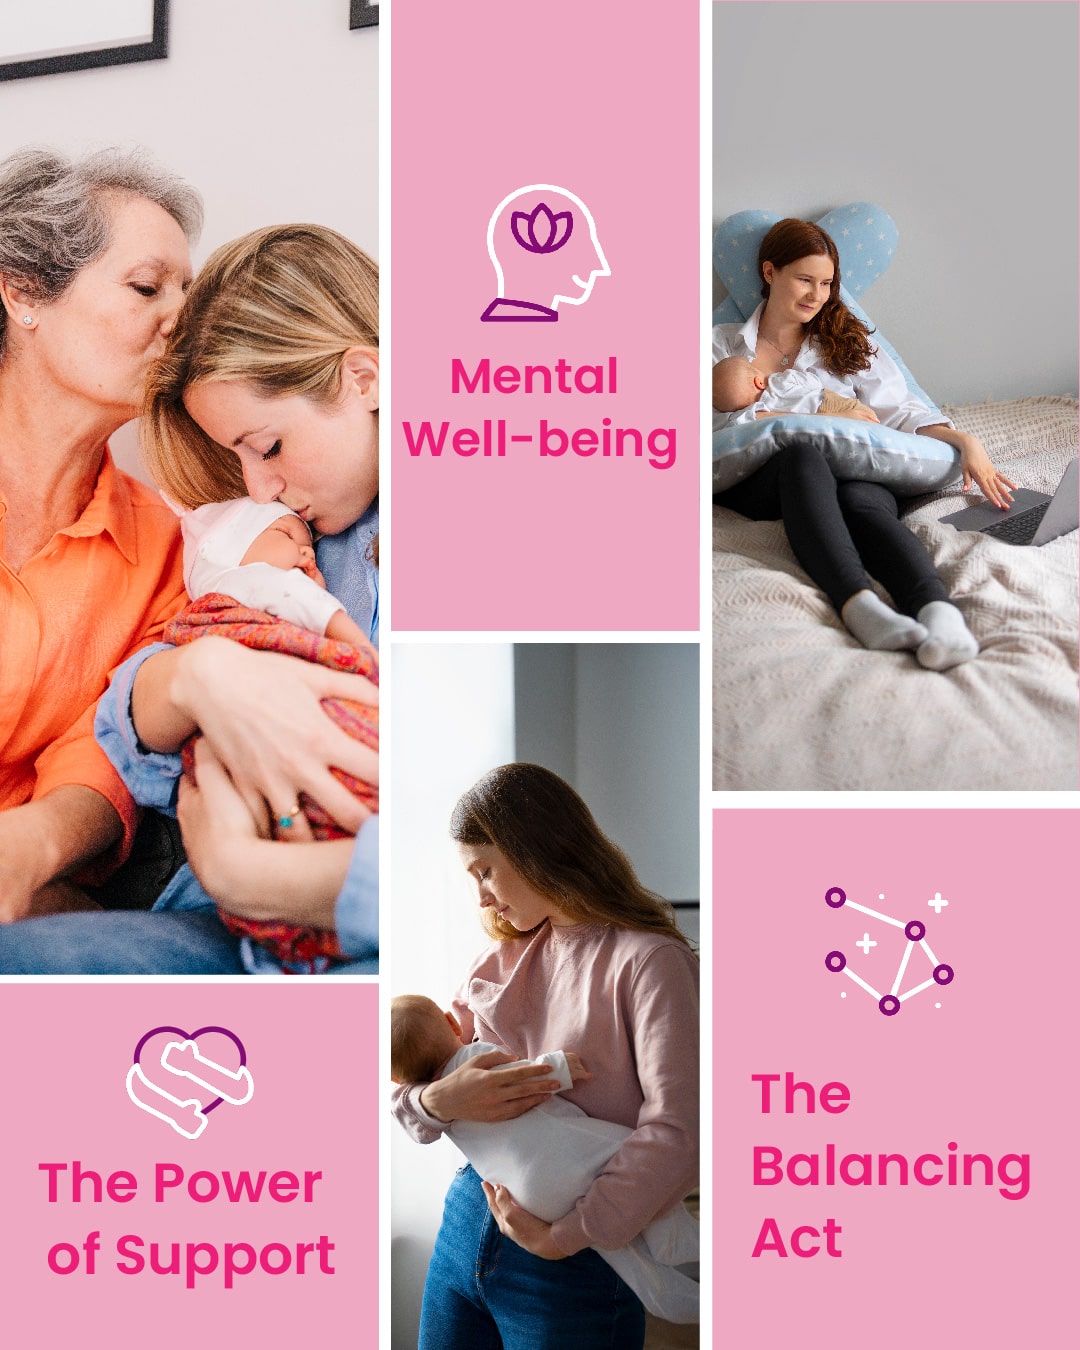 Triptych of mothers holding their babies during 'World Breastfeeding Week', with texts 'The Power of Support', 'Mental Well-being', and 'The Balancing Act'